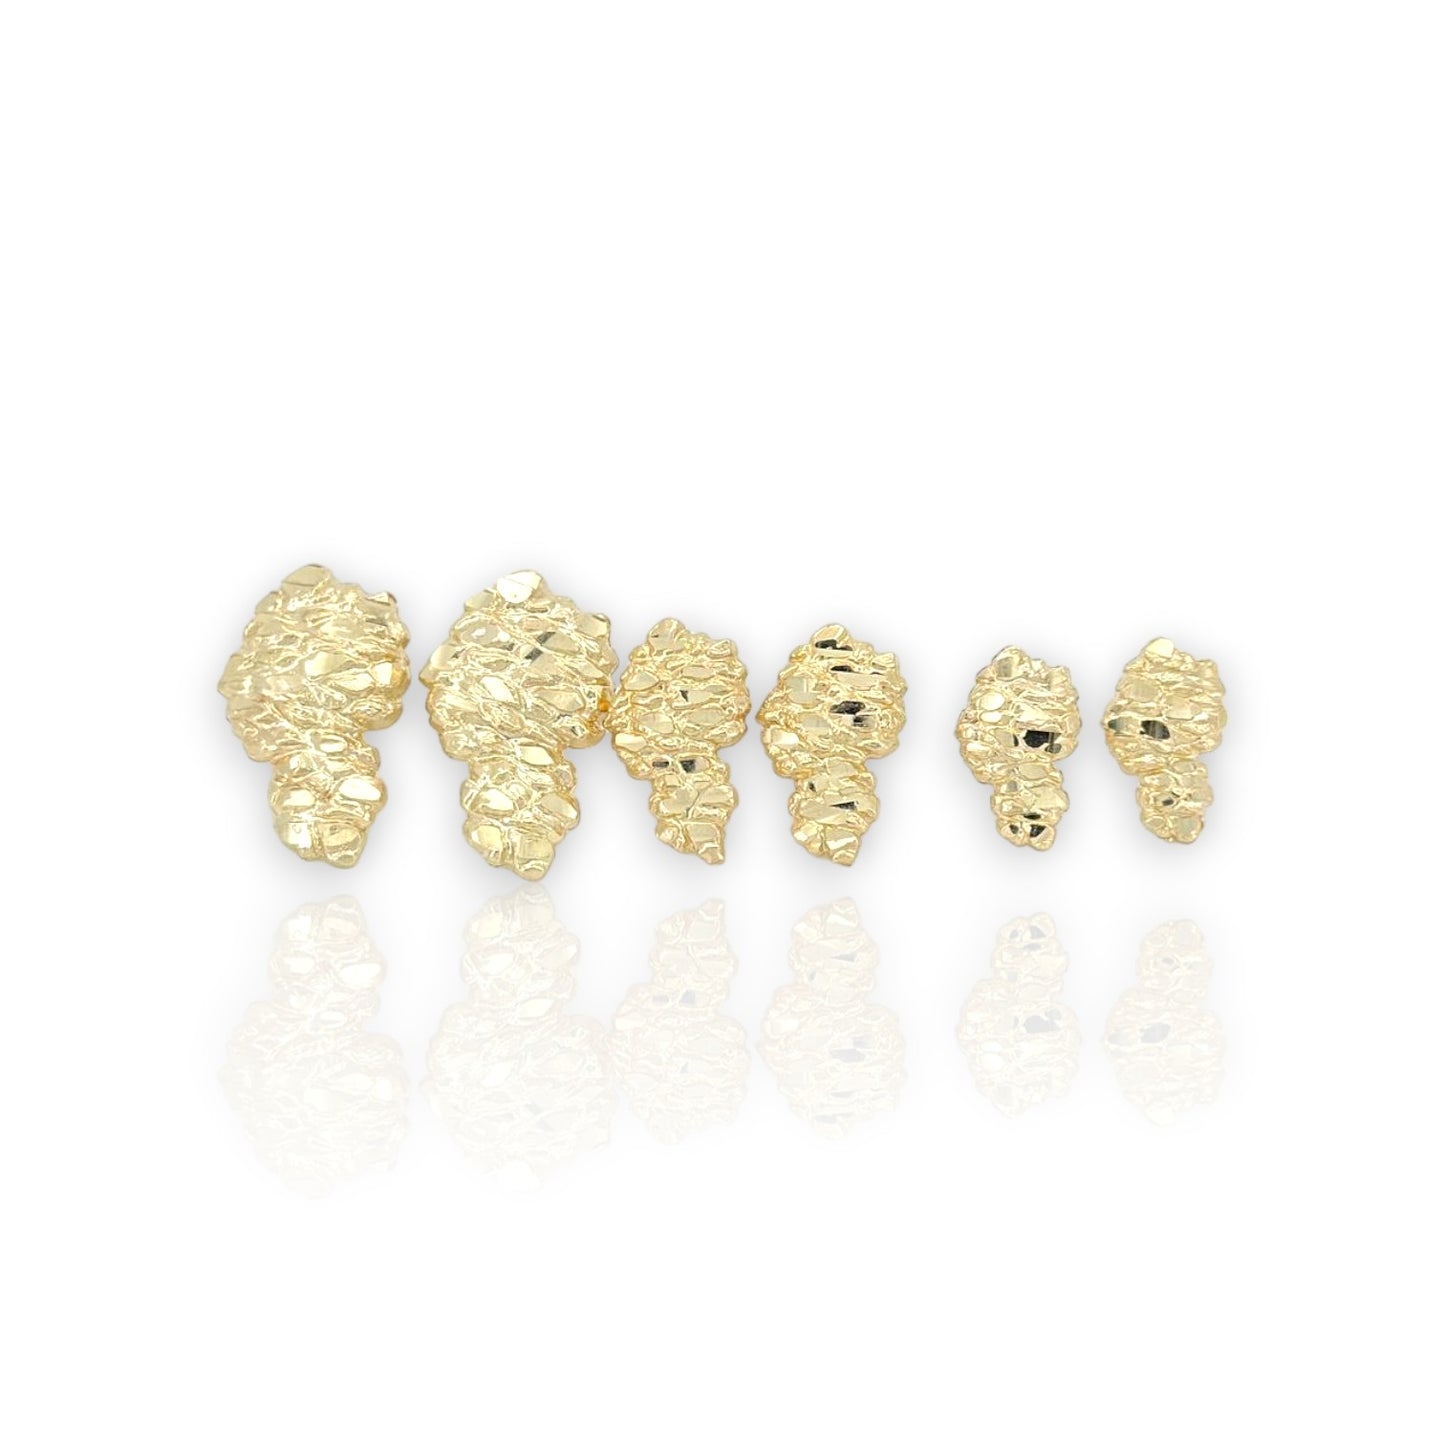 Africa Nugget Earrings - 10K Yellow Gold